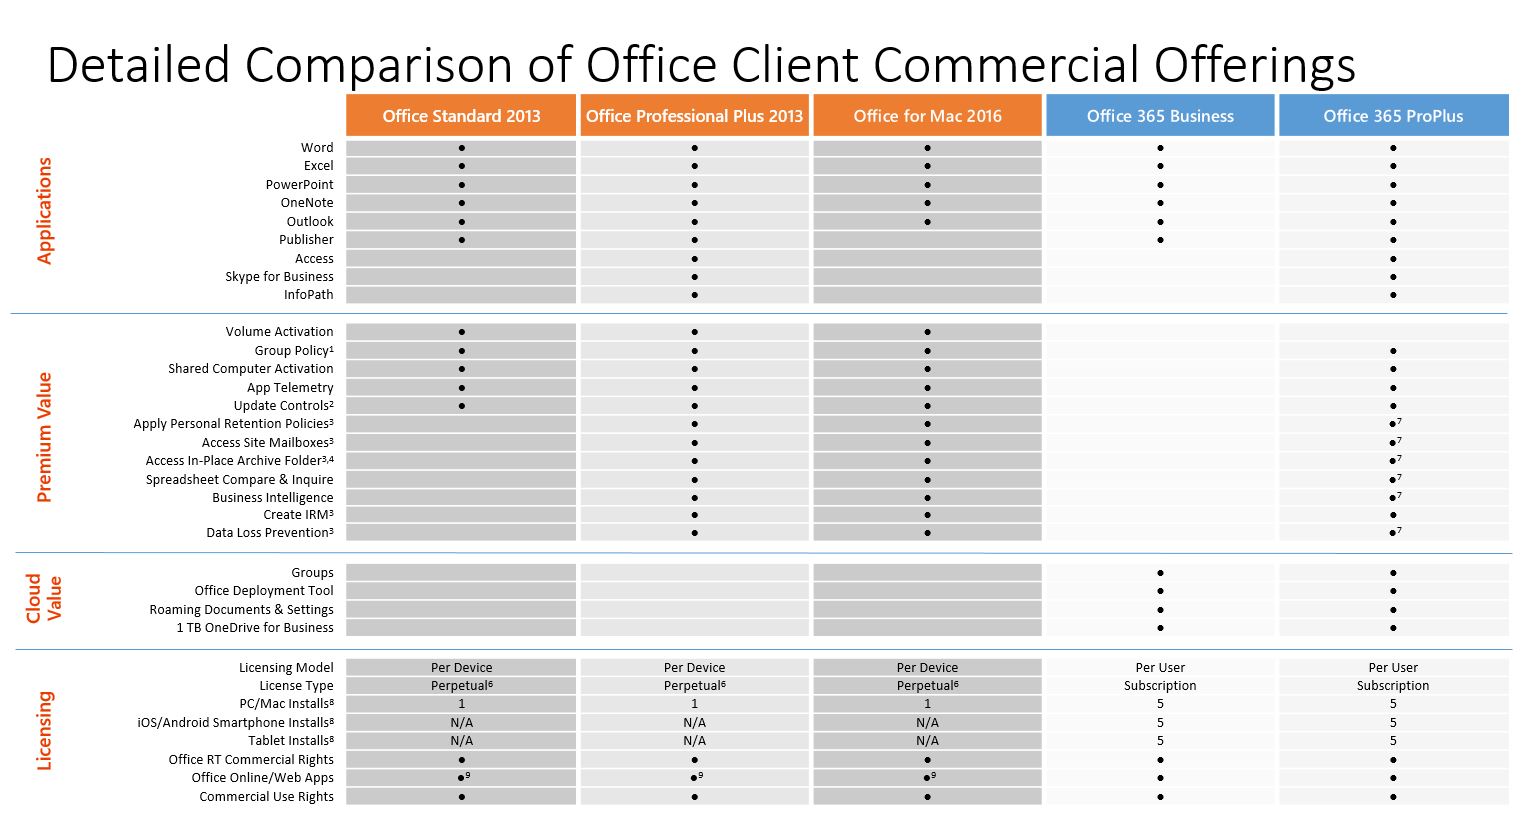 Detailed Comparison of Office Client Commercial Offerings2